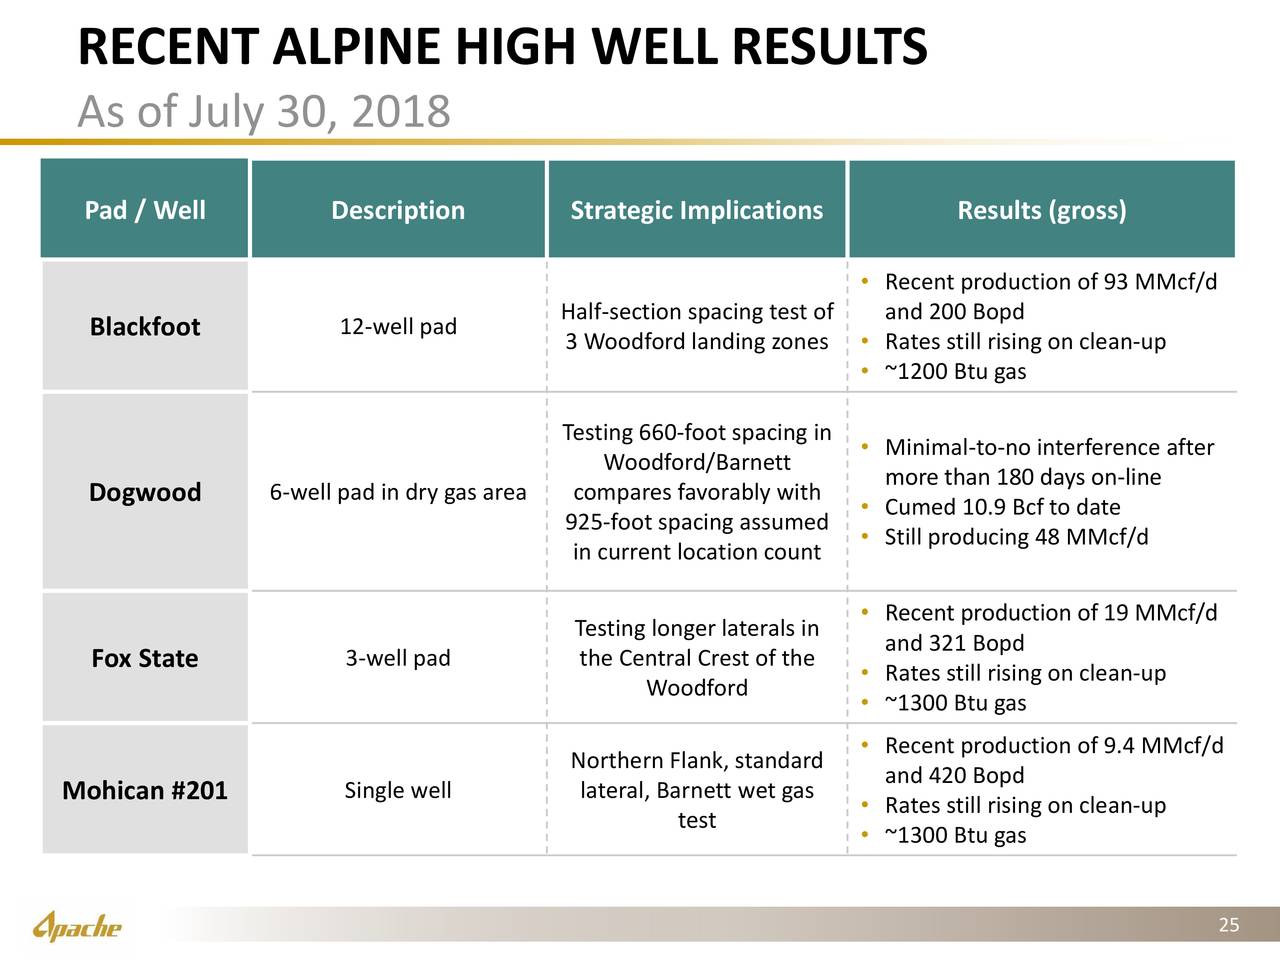 RECENT ALPINE HIGH WELL RESULTS